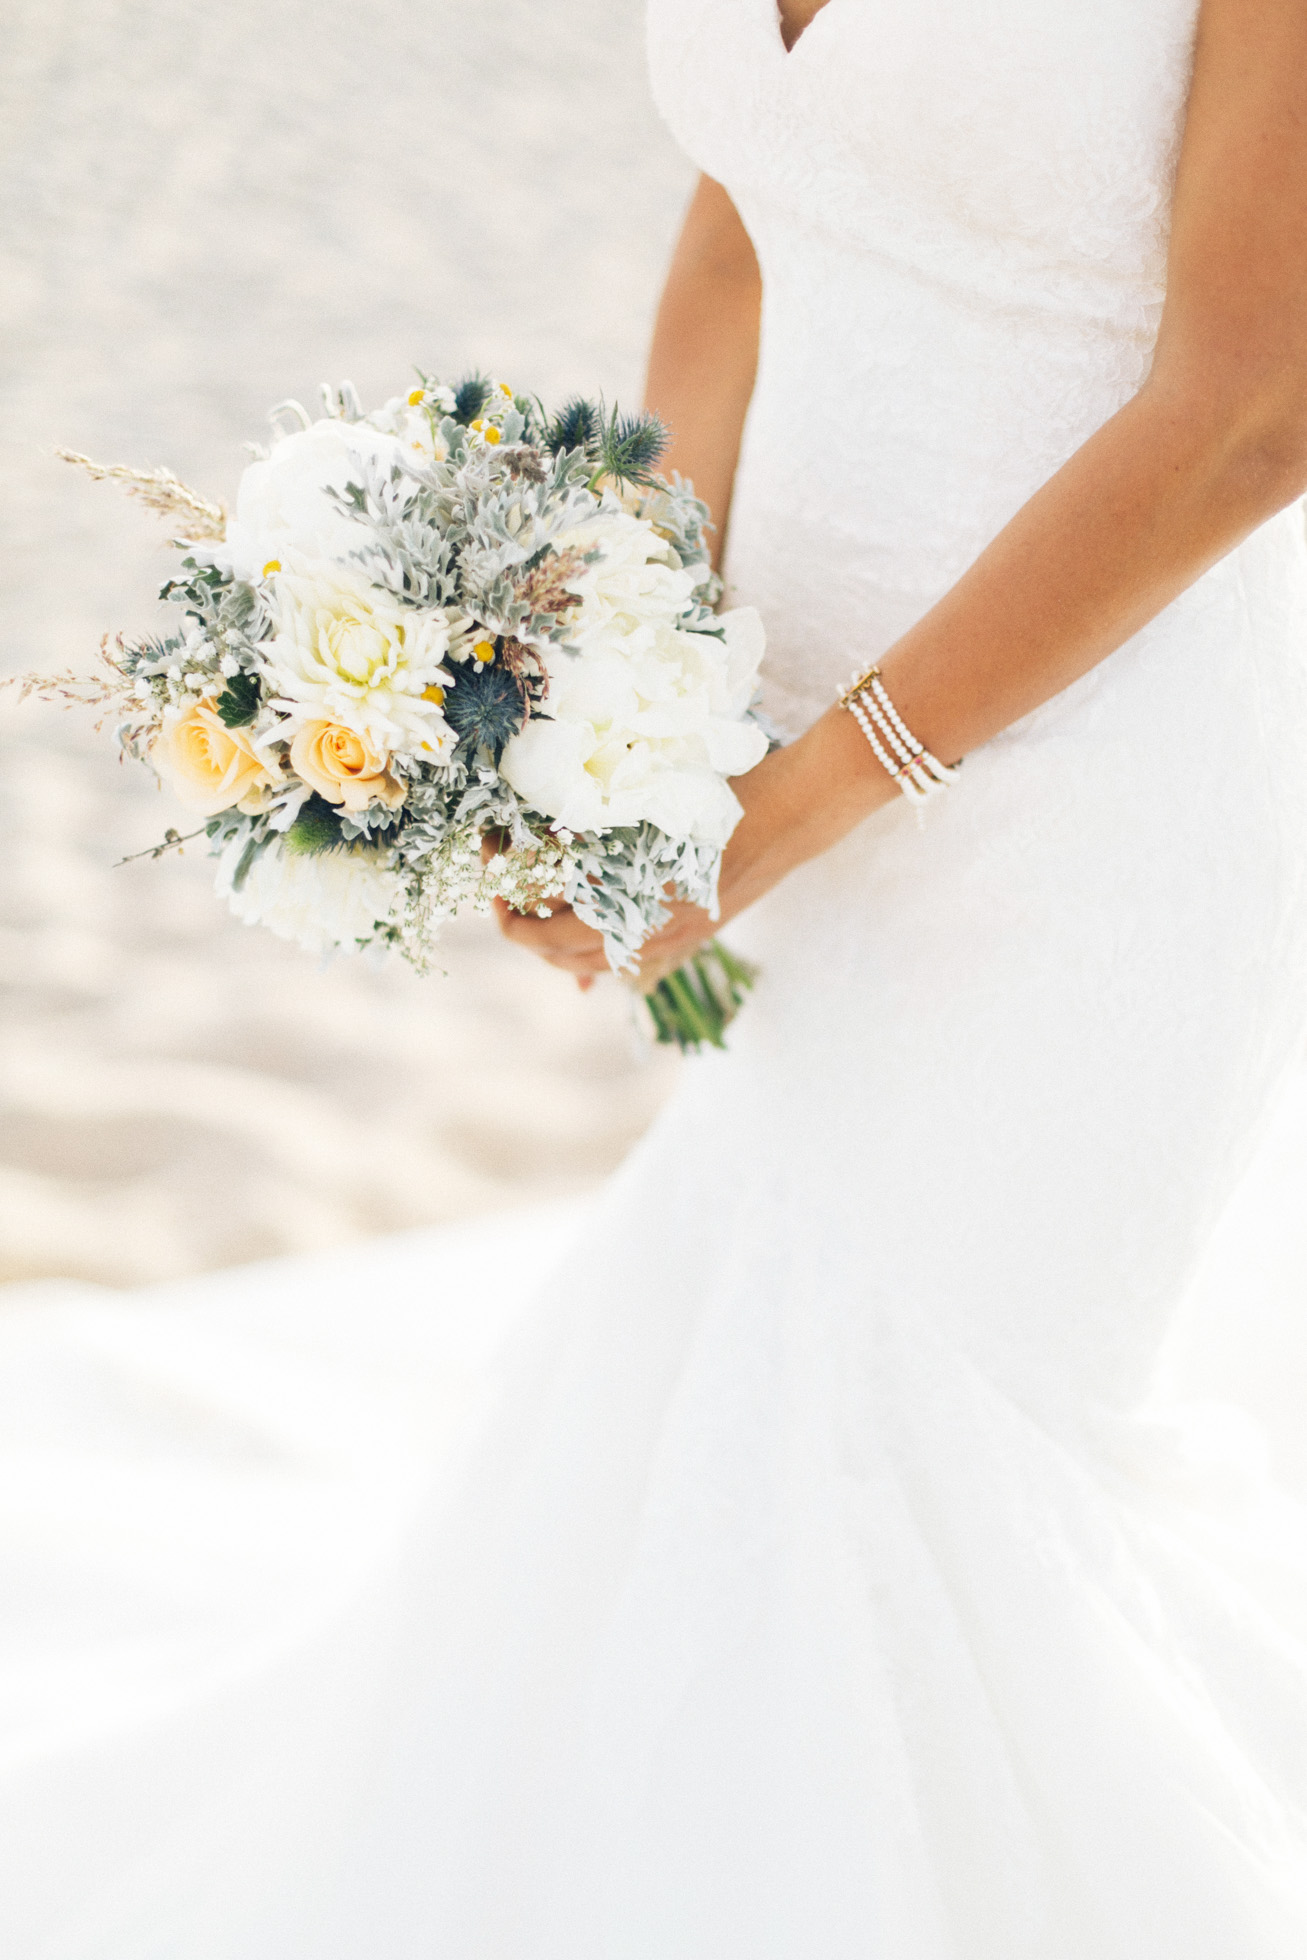 Professional Crete wedding photoshoot, closeup image of the bride holding her bouquet on the beach and posing for photographer.